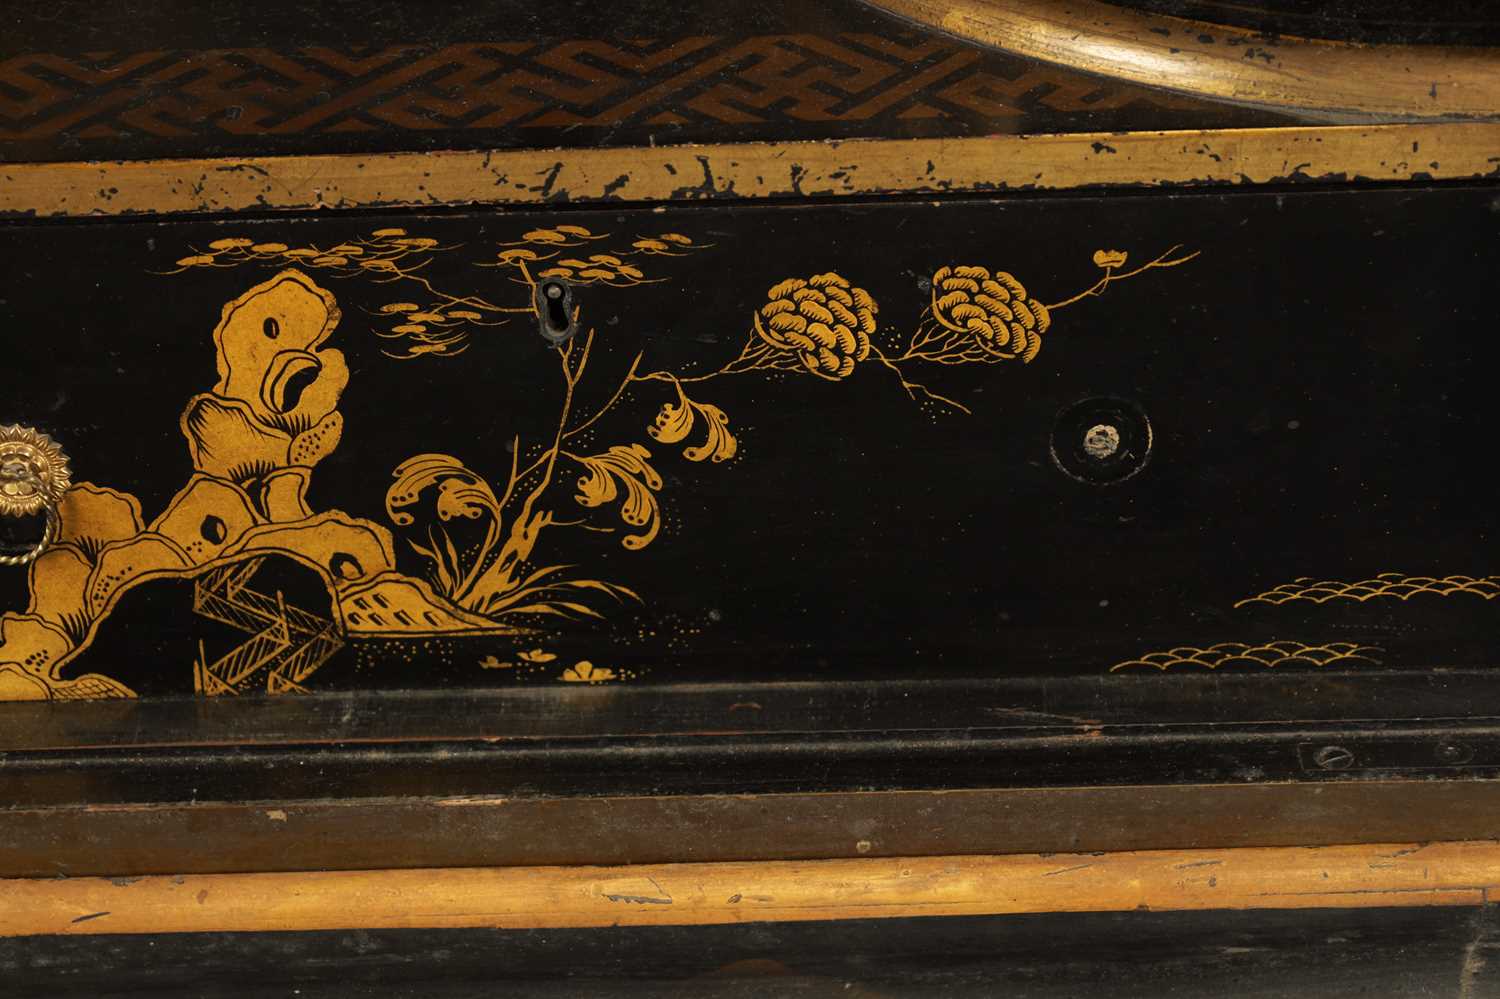 AN ENGLISH REGENCY CHINOISERIE DECORATED LACQUERWORK CABINET ON STAND - Image 6 of 9